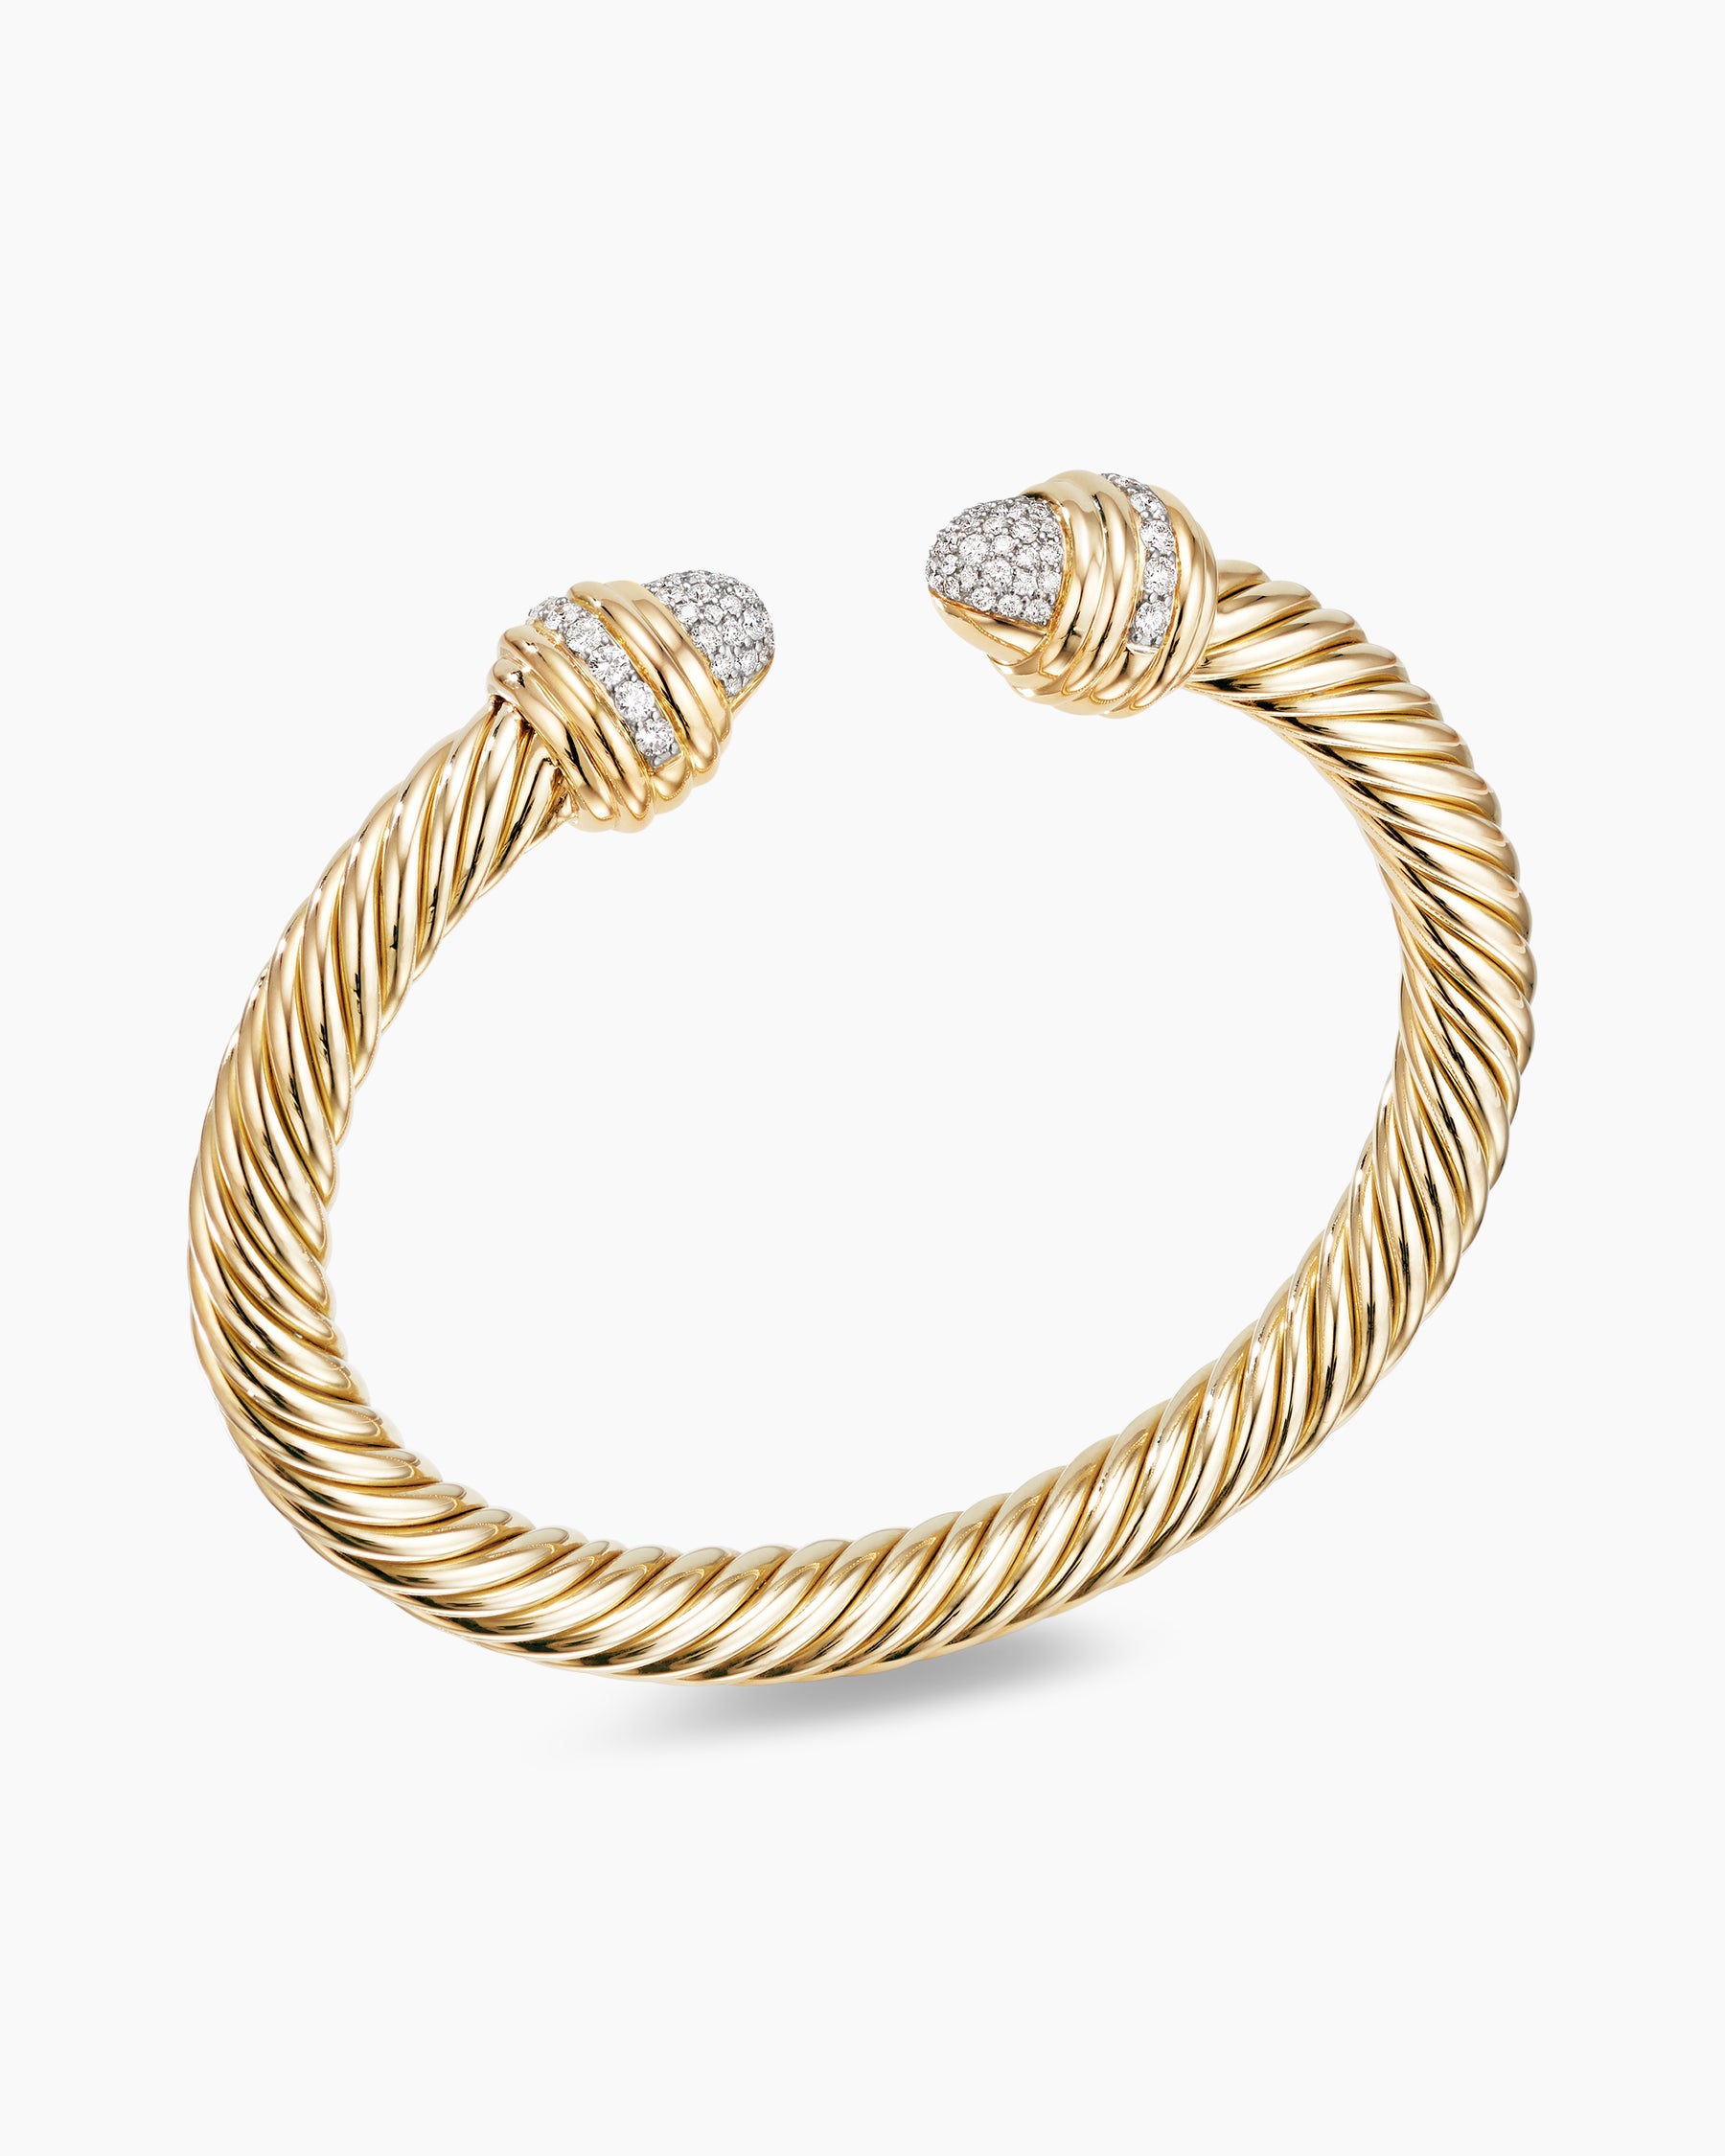 Pavé Chain Bracelet in 18K Yellow Gold with Diamonds, 7mm